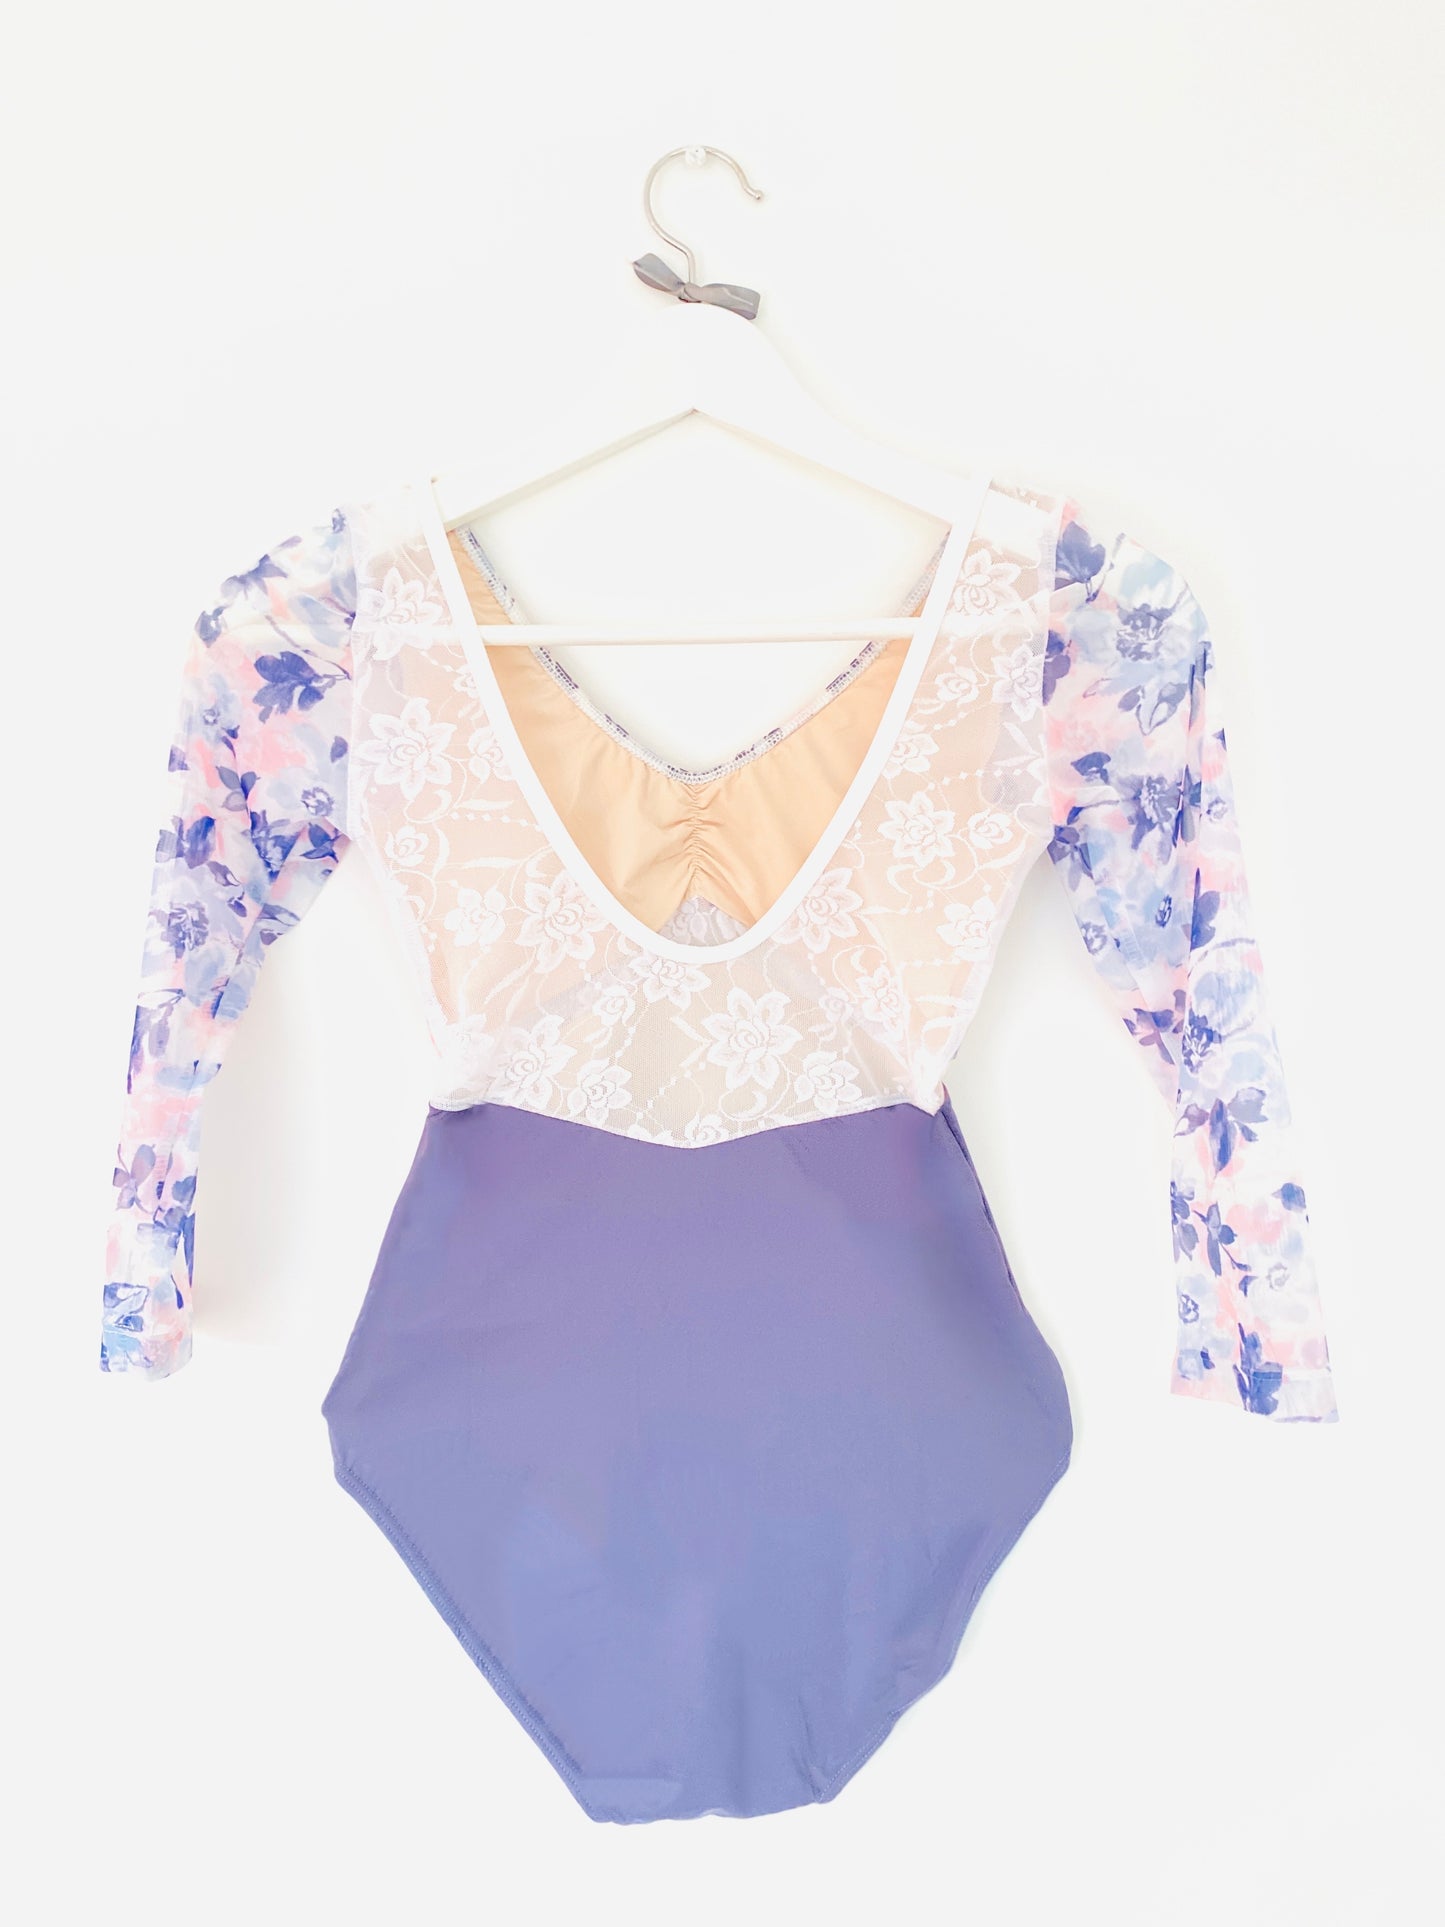 Floral plum leotard with a deep lace back and long sleeves from the Collective Dancewear